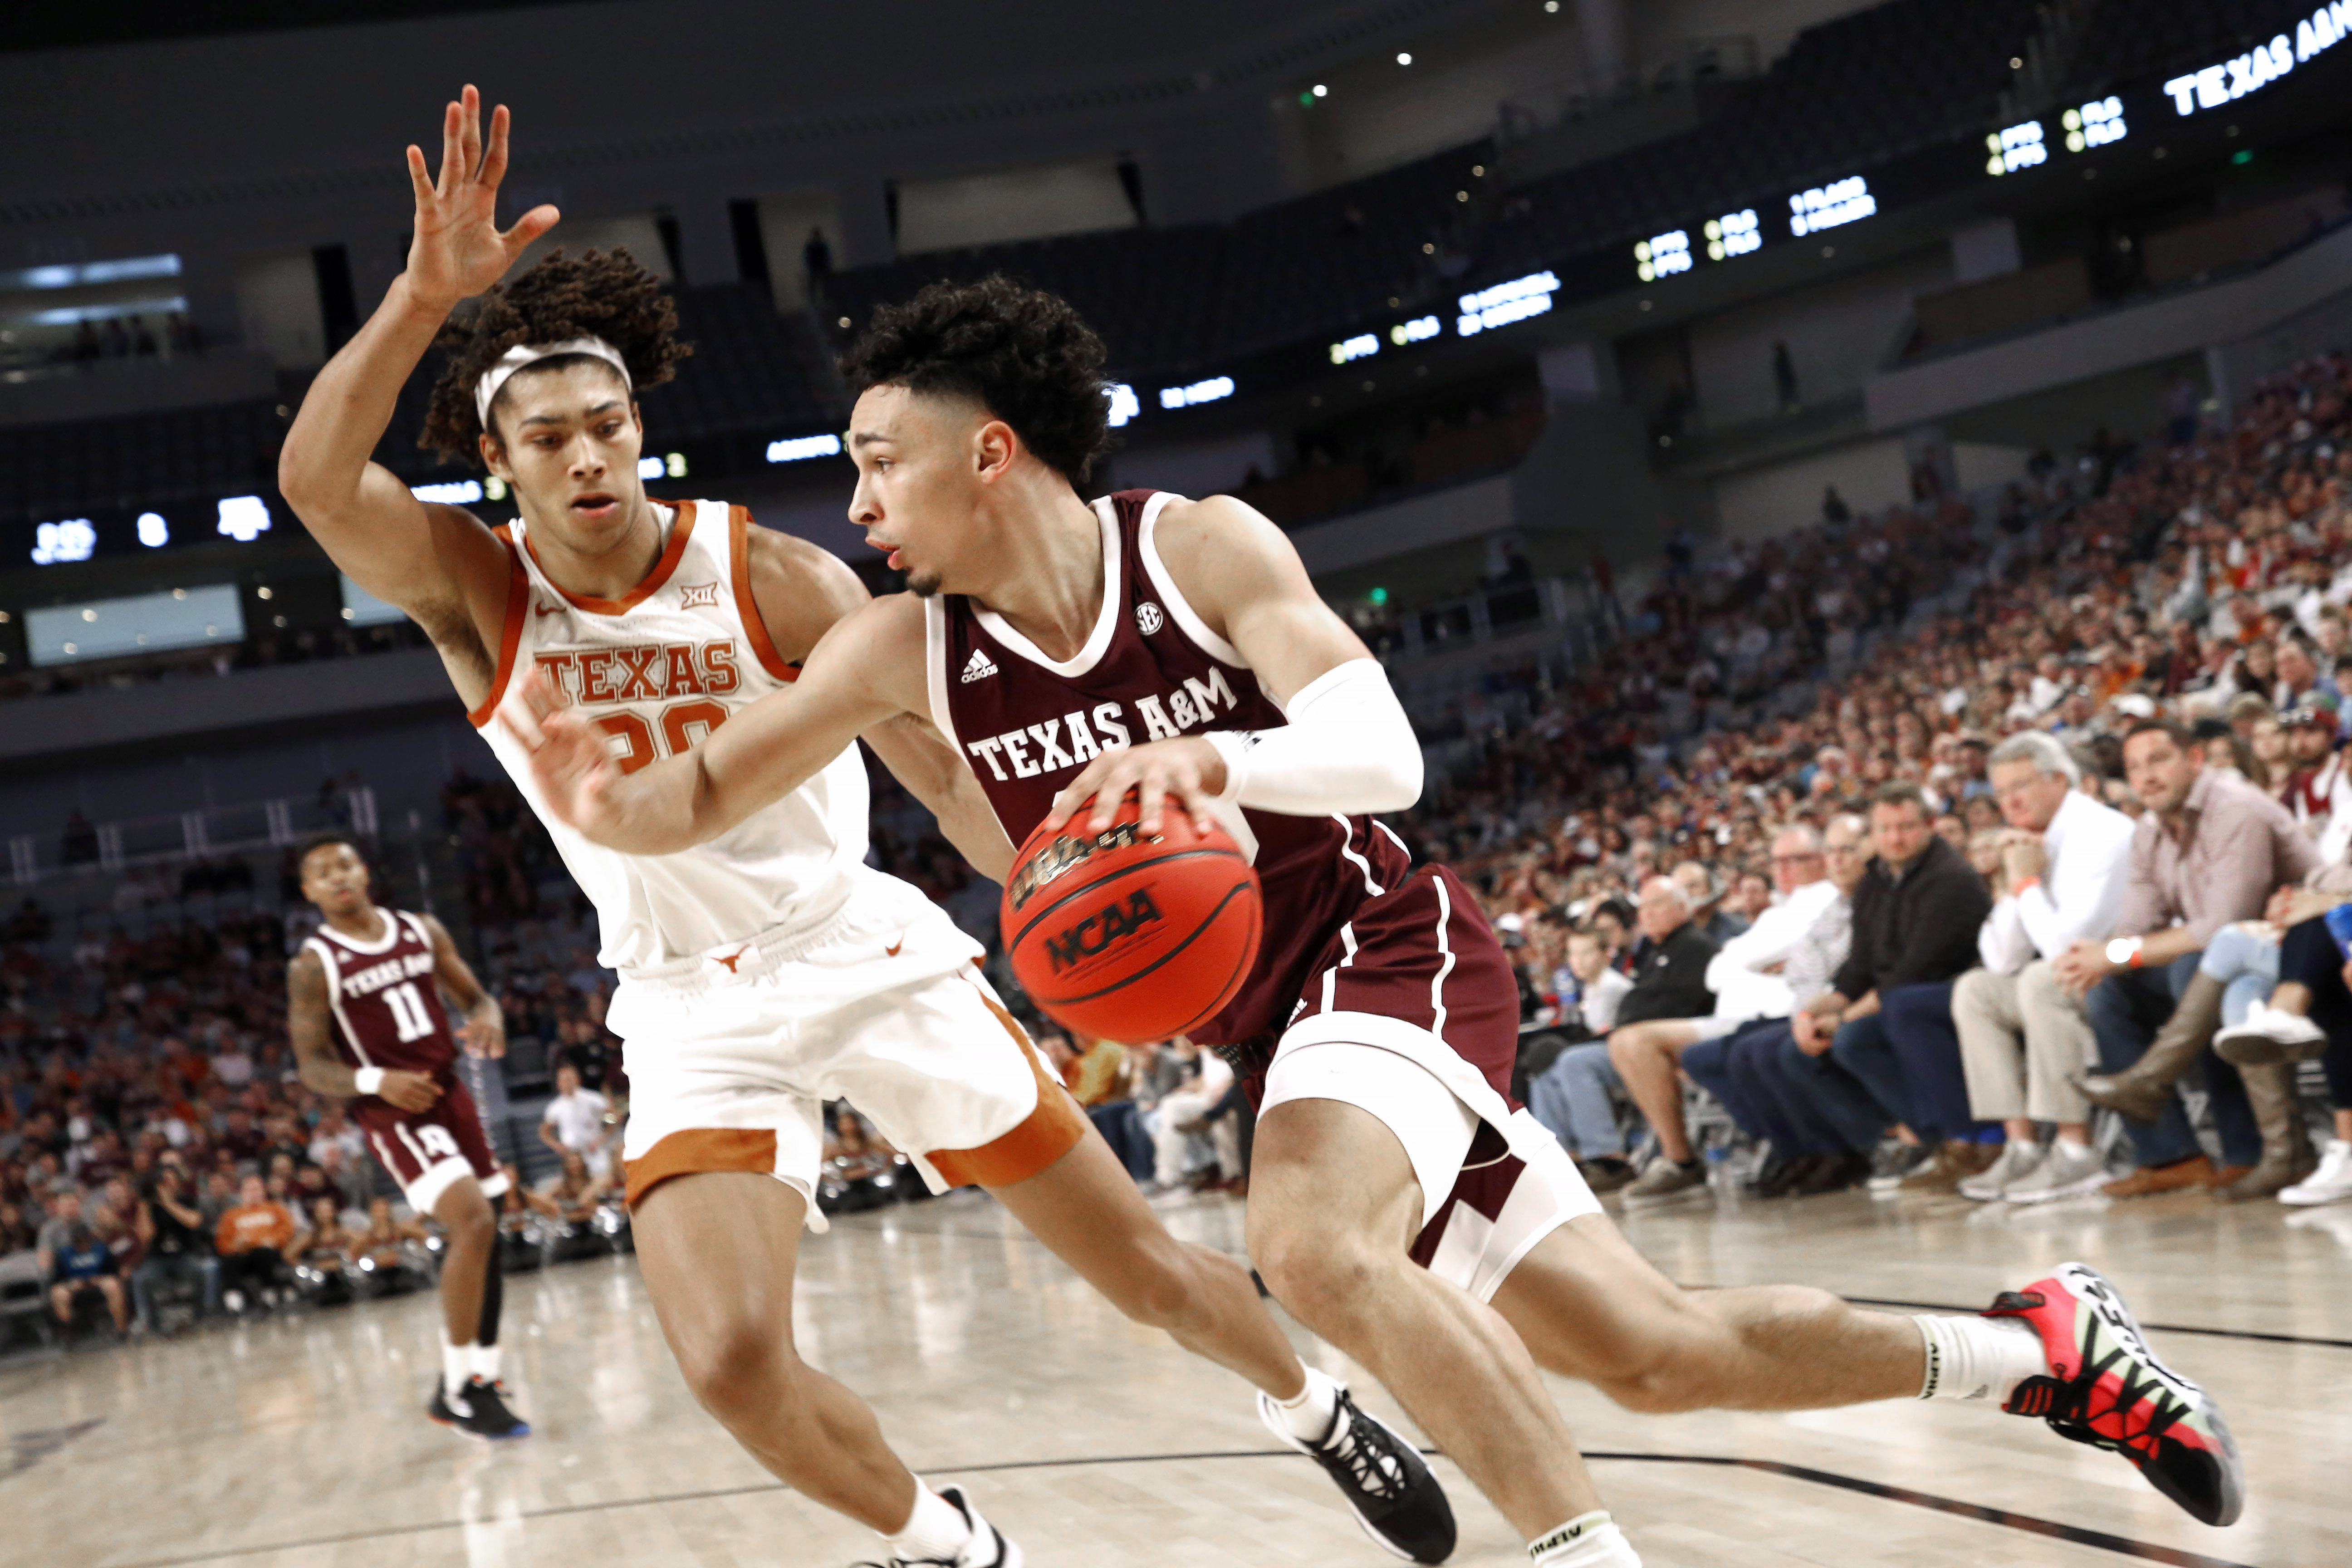 Texas tops Texas A&M 60-50 in rivals’ 1st meeting since 2015